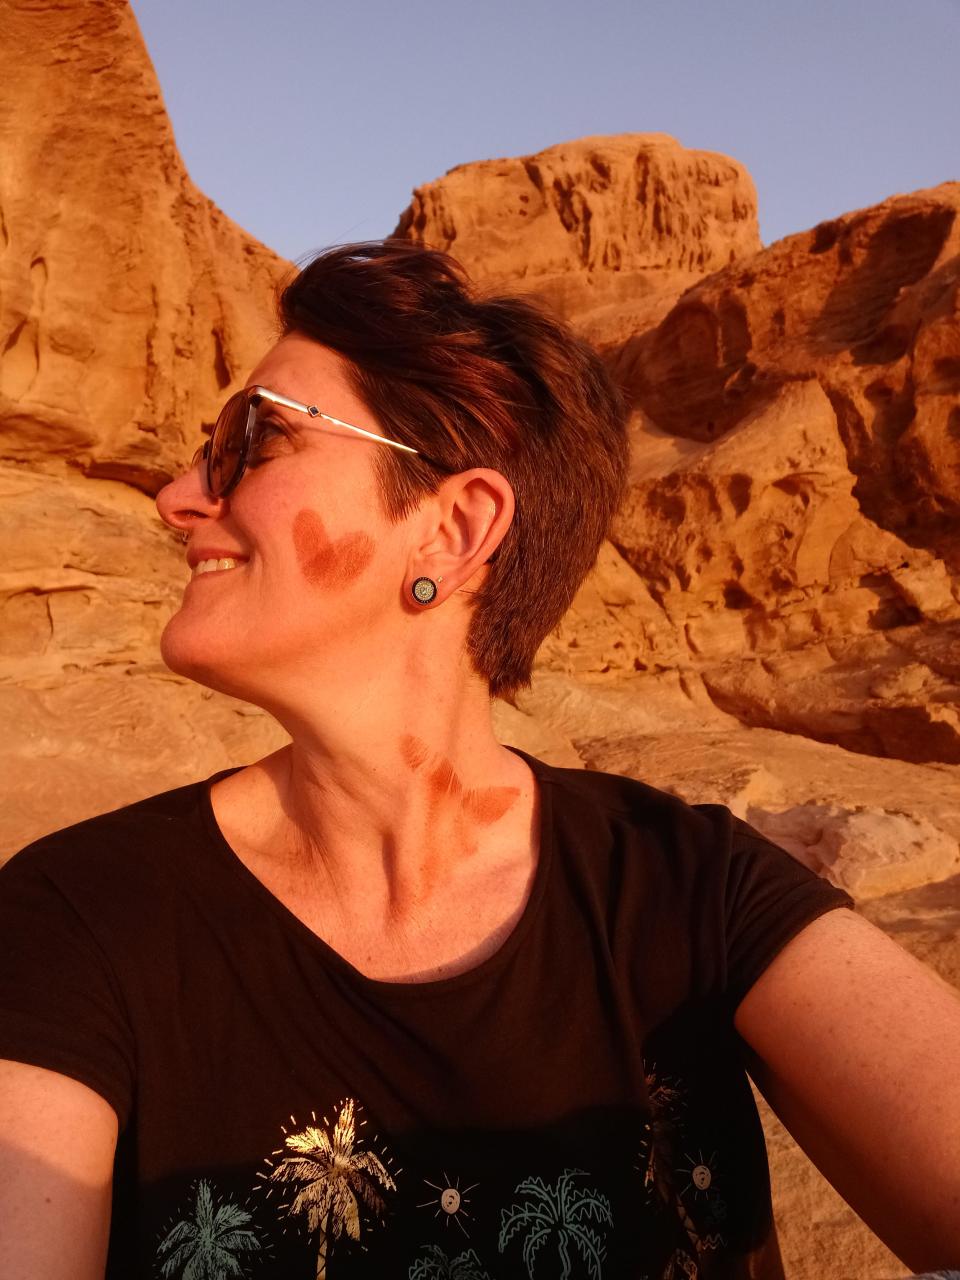 Over time Claire Macklin managed to find joy in life again, pictured here in Jordan. (Supplied)